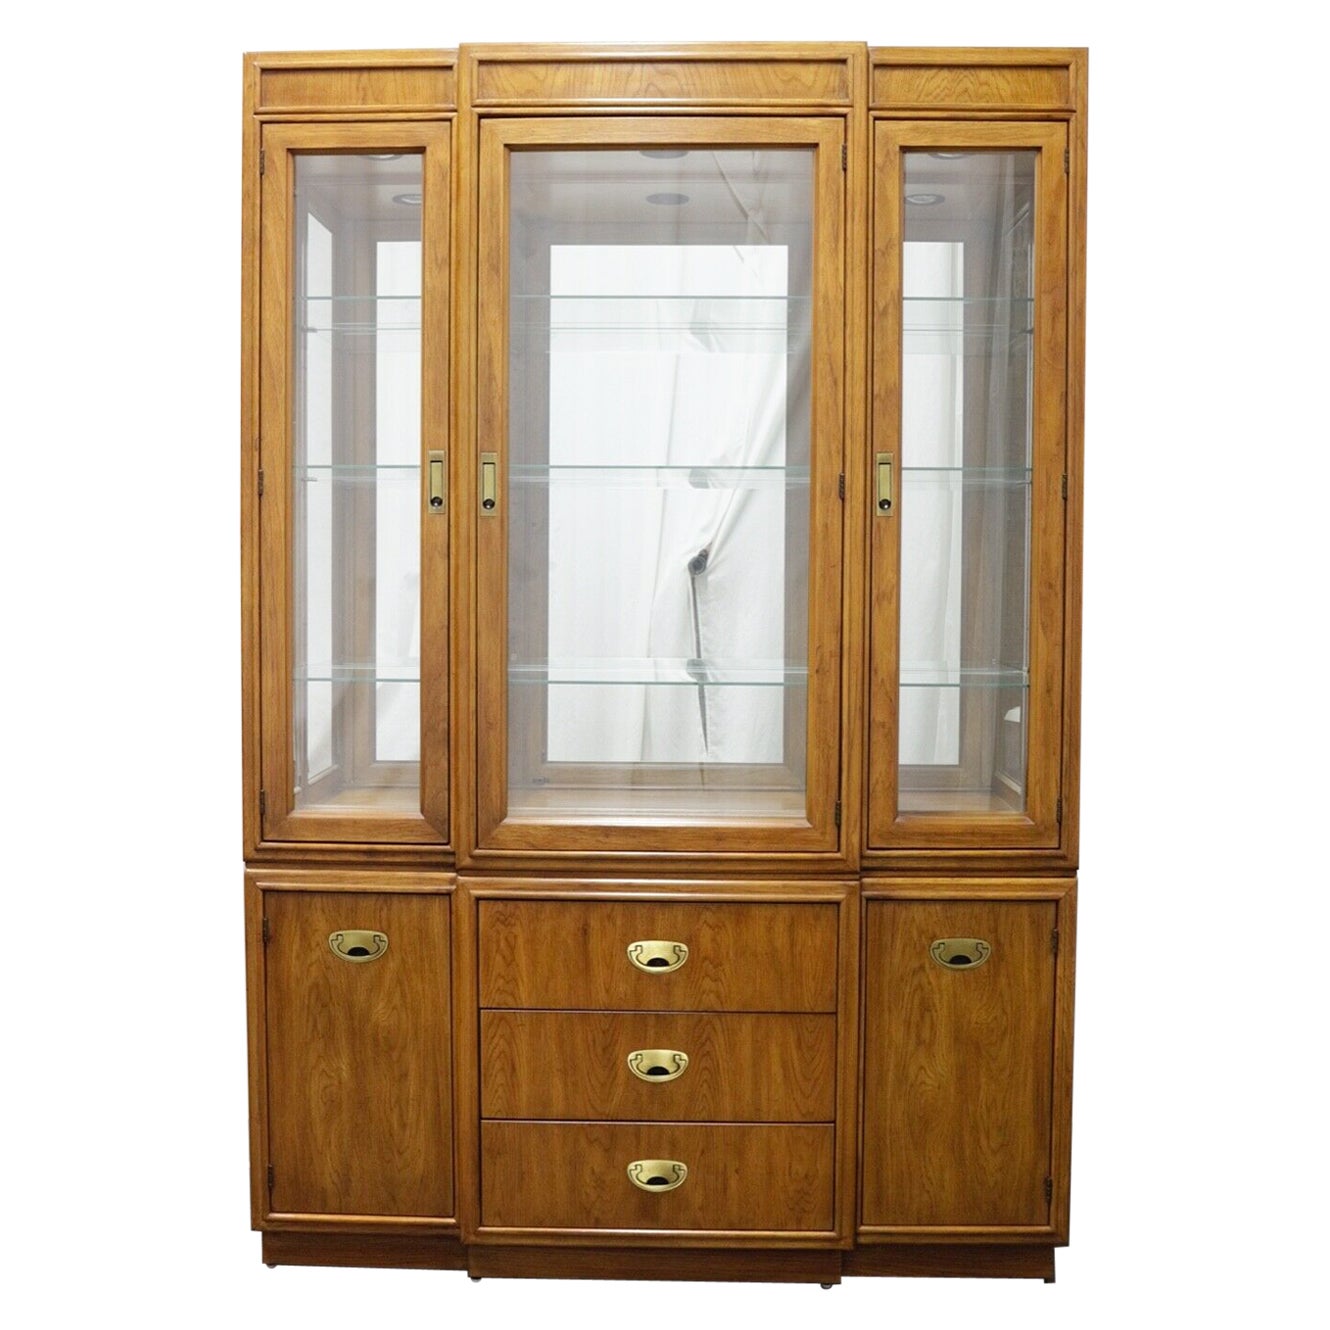 DREXEL Heritage Passage Campaign Style China Cabinet